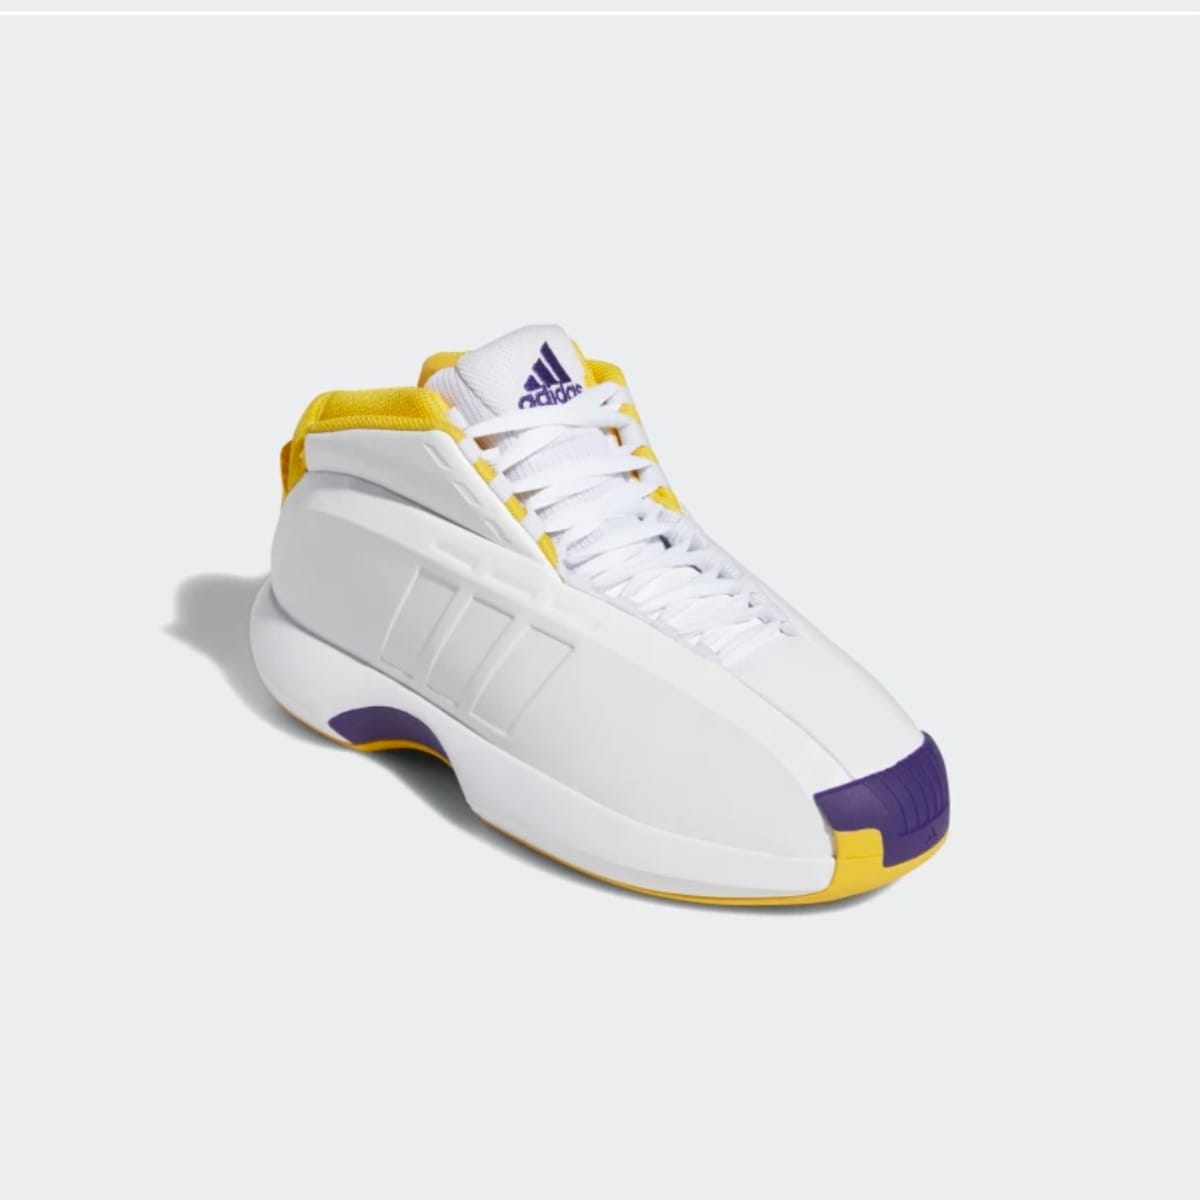 Adidas Crazy 1 'Lakers' Release Information - Sports Illustrated FanNation  Kicks News, Analysis and More